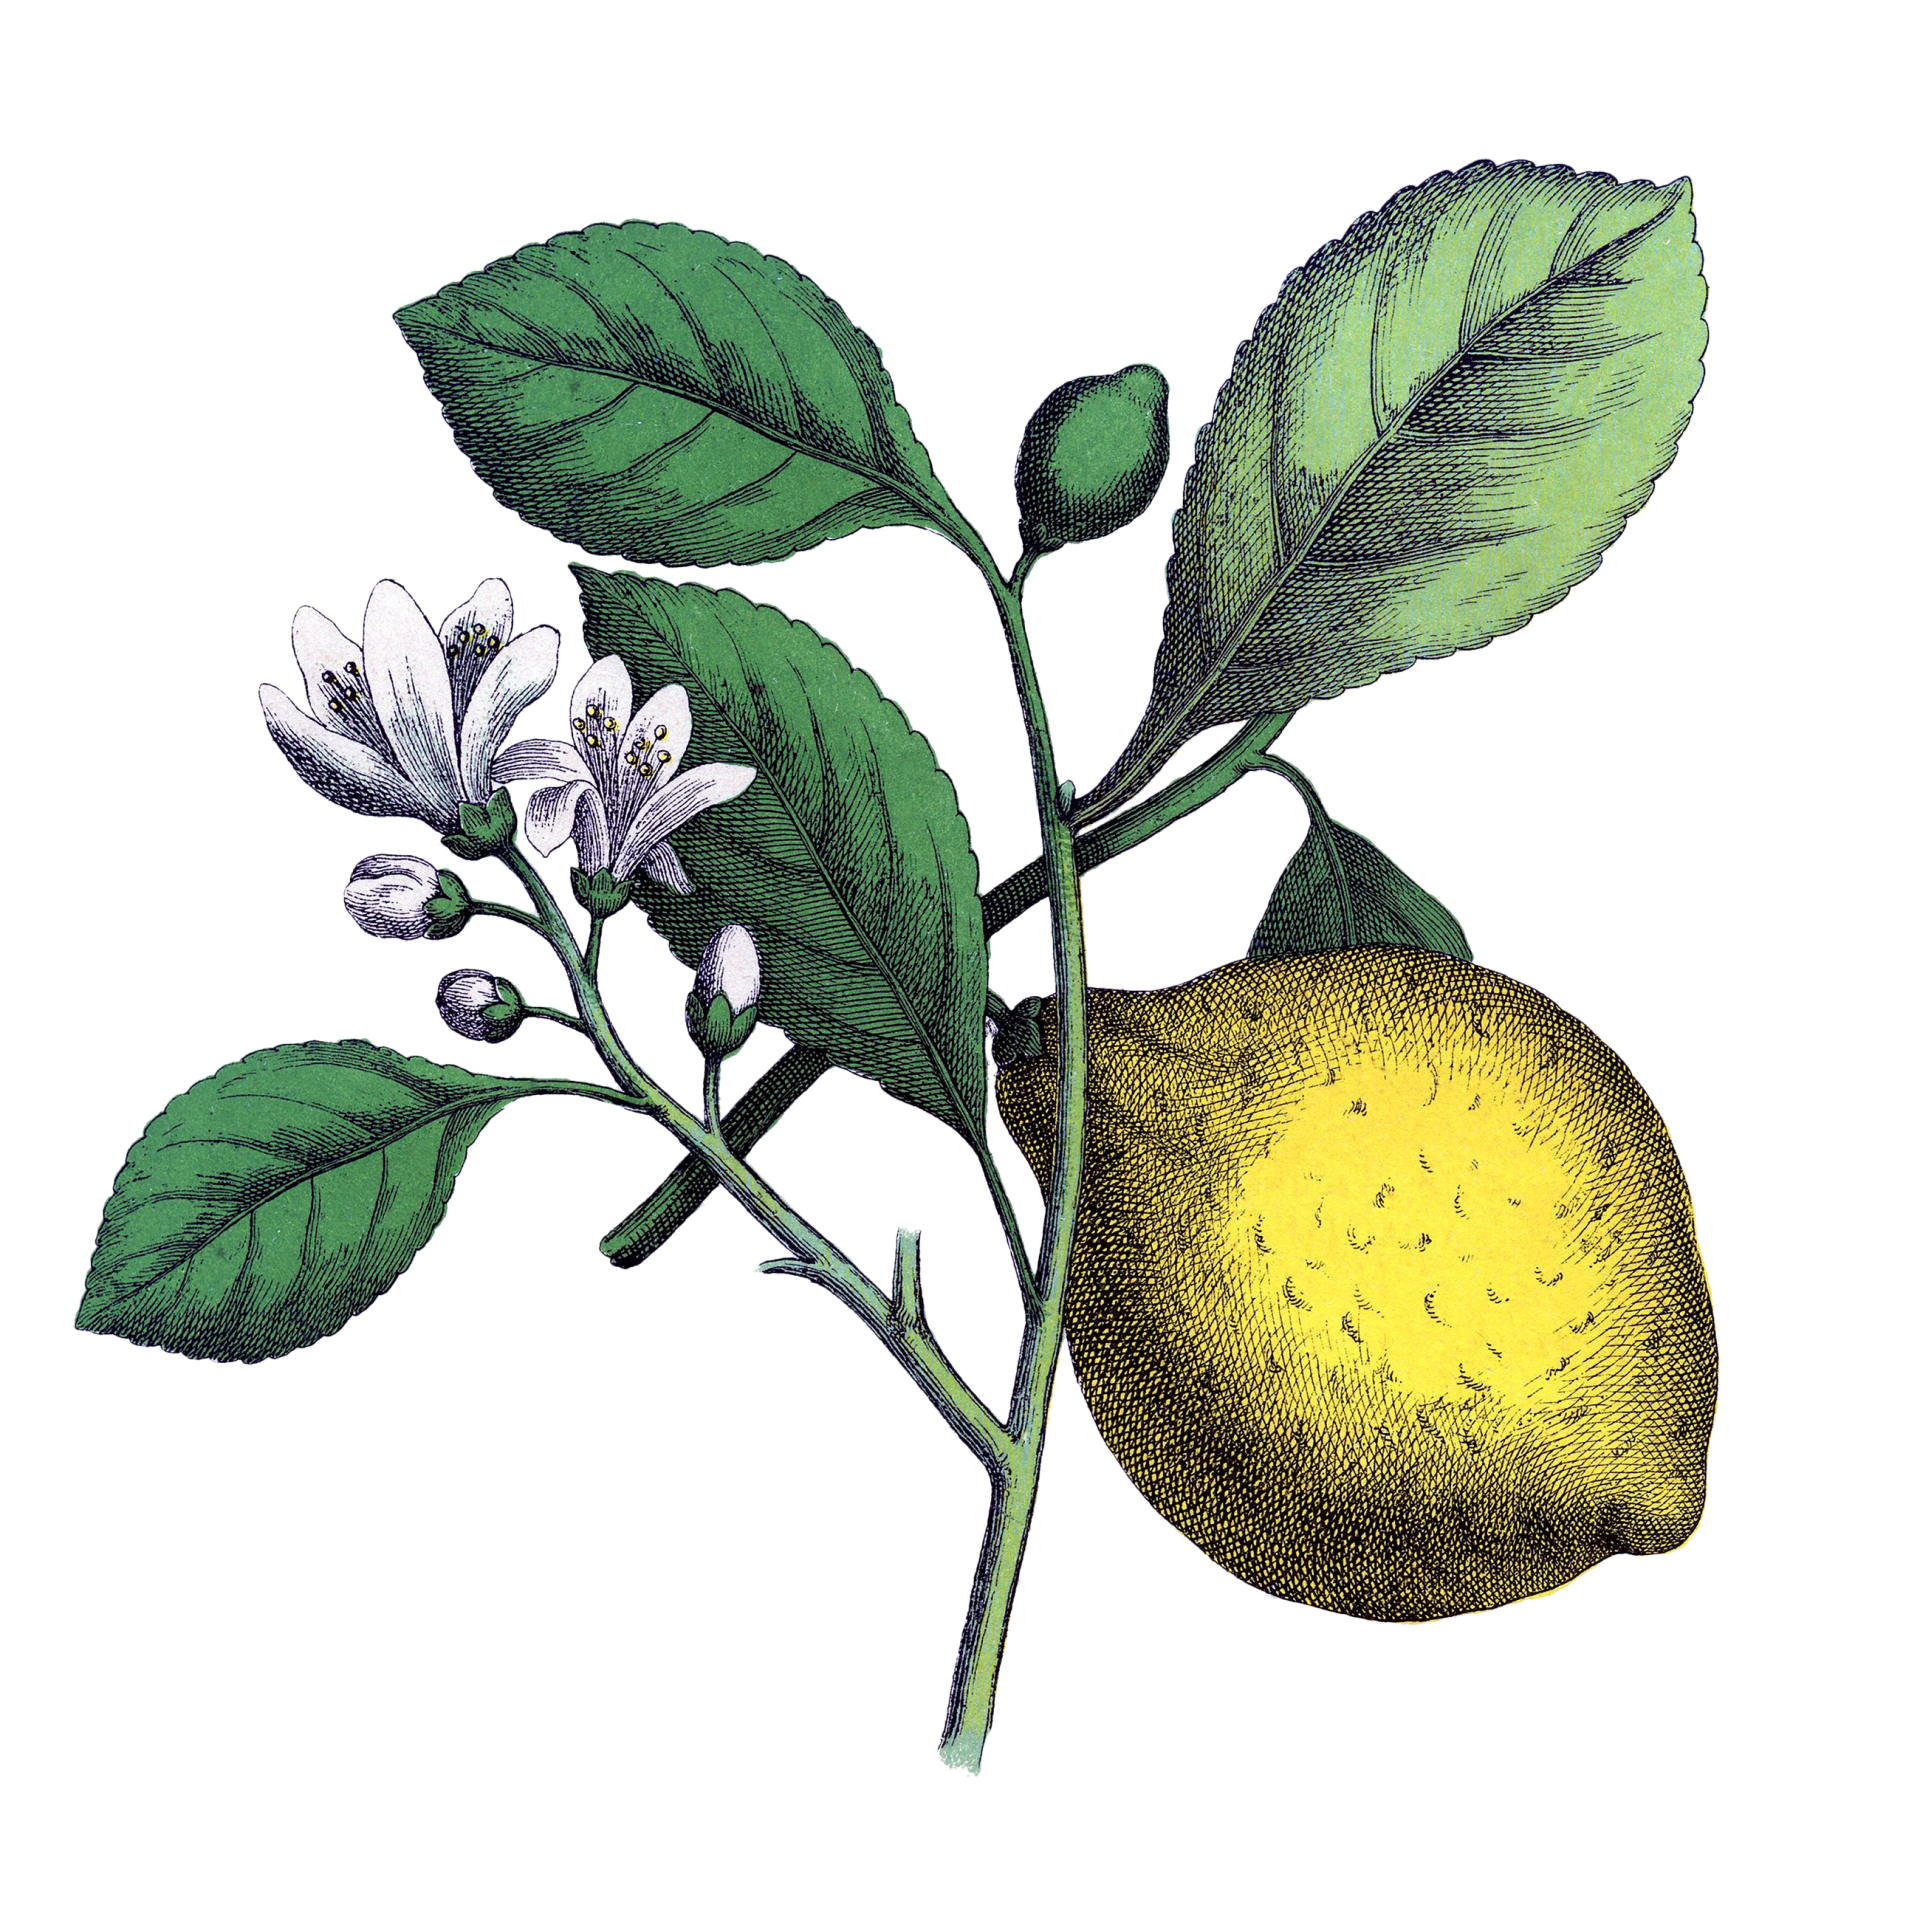 Vintage botanical art illustration of lemons, fruit of the lemon tree clipart cut out on transparent png background with leaves and blossom flowers